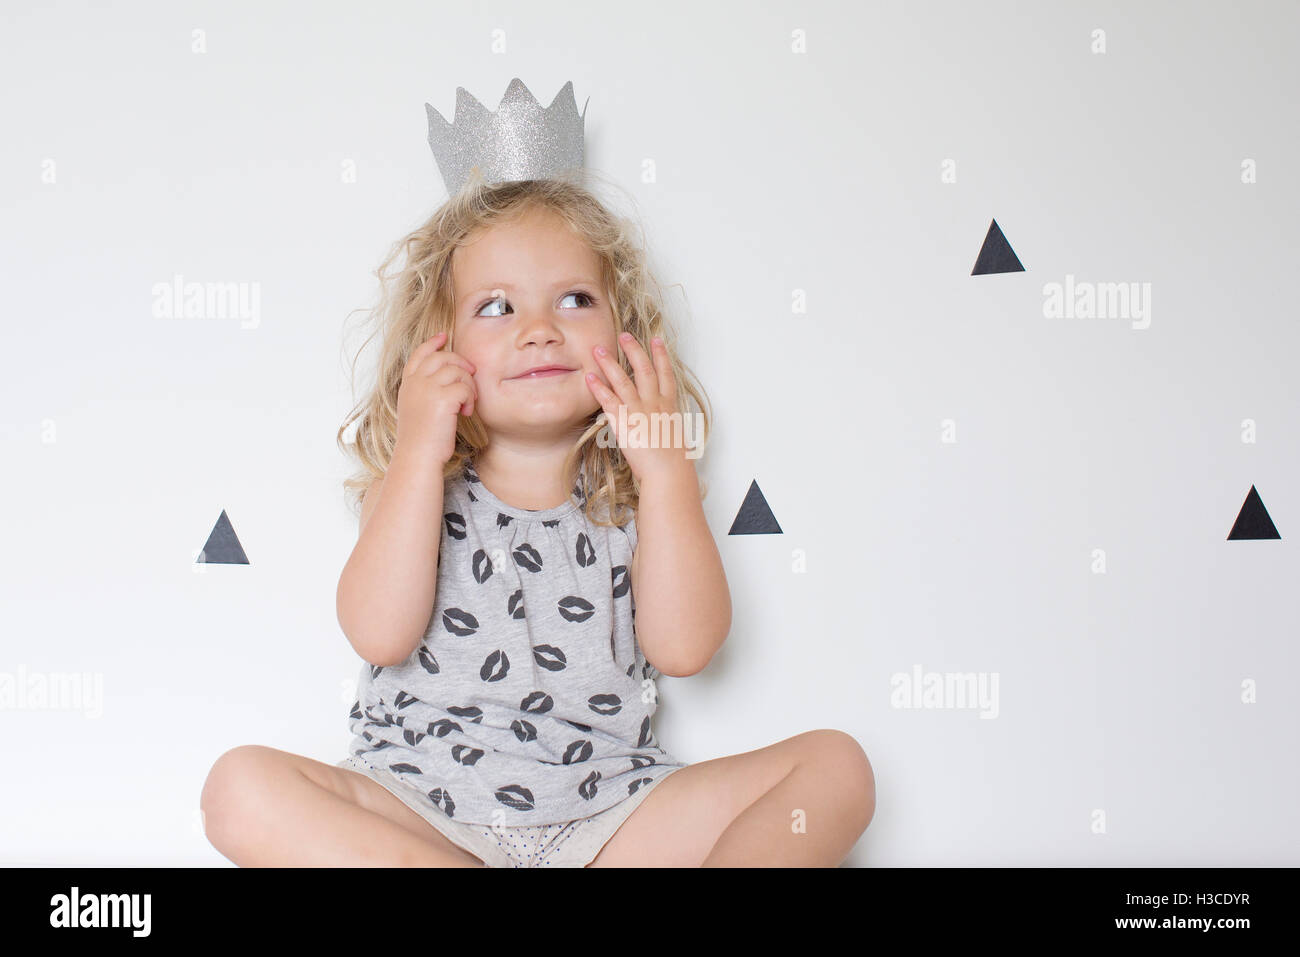 Little girl wearing a paper crown Stock Photo